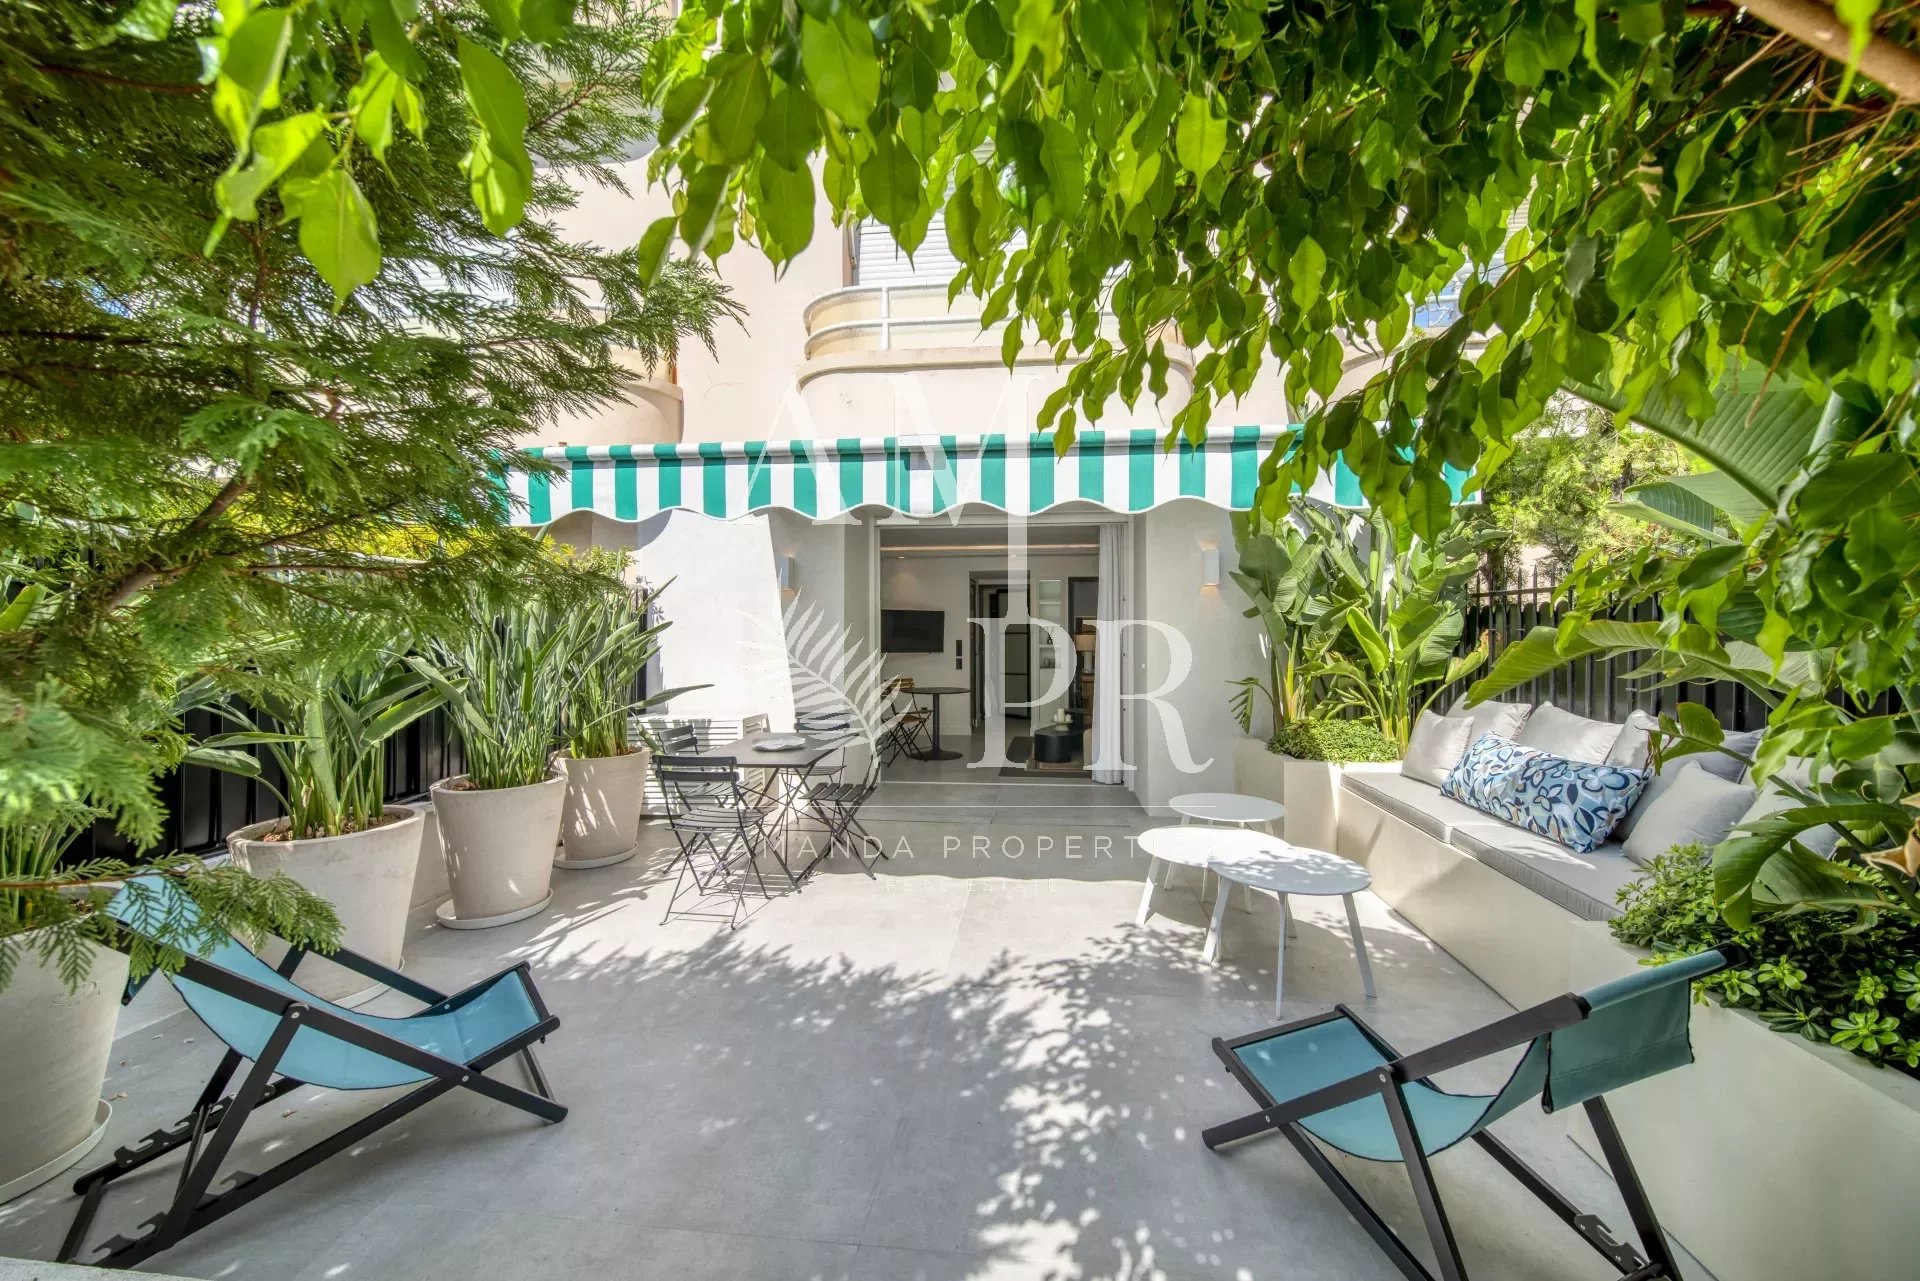 Cannes Croisette - Charming 3 room flat - Garden level - Ideal Rental Investment